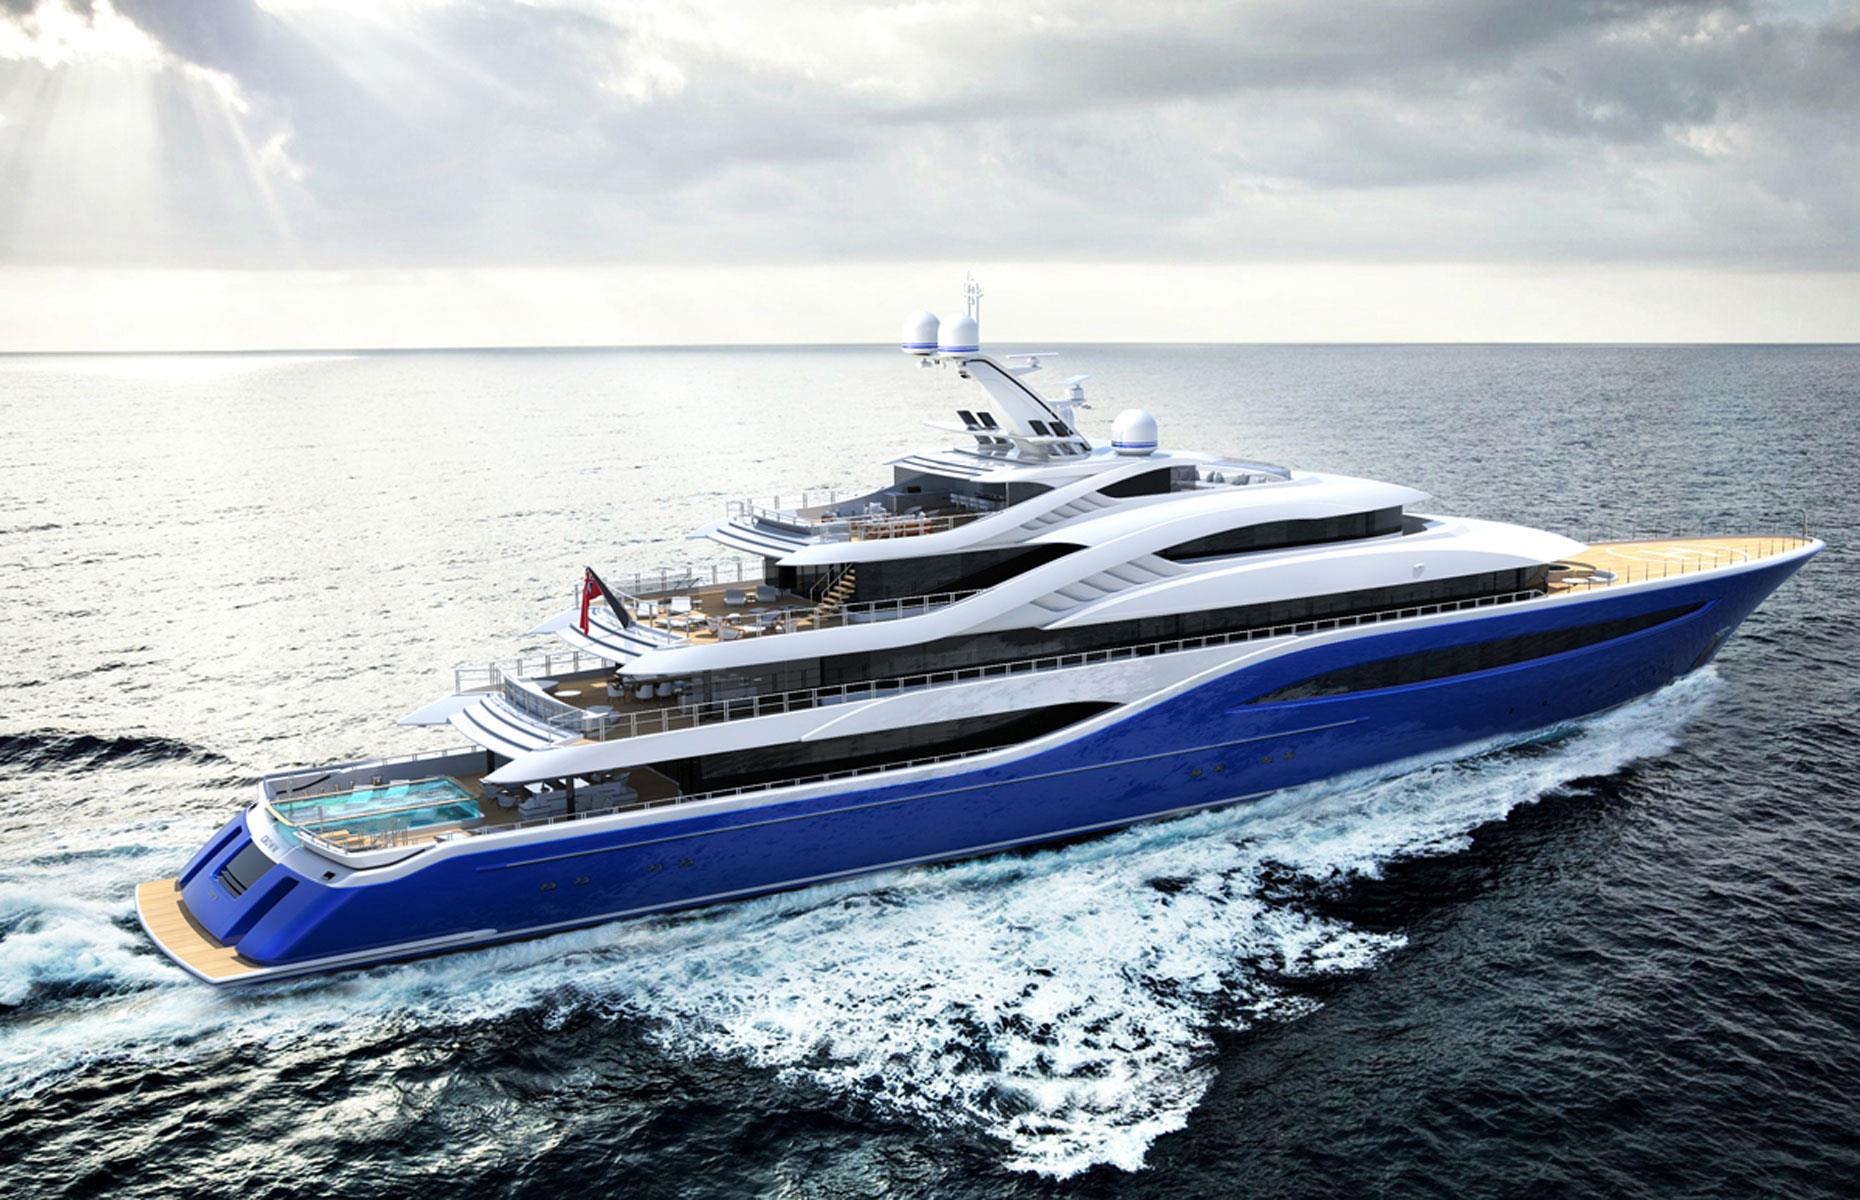 <p>The interiors are just as eye-catching, with the superyacht boasting a wealth of features.</p>  <p>For the billionaire who has everything, there's a helipad that can also be used as an outdoor cinema and basketball court. But the <em>pièce de résistance</em> has to be the incredible 21-foot (6.5m) glass-sided swimming pool on the lowest deck.</p>